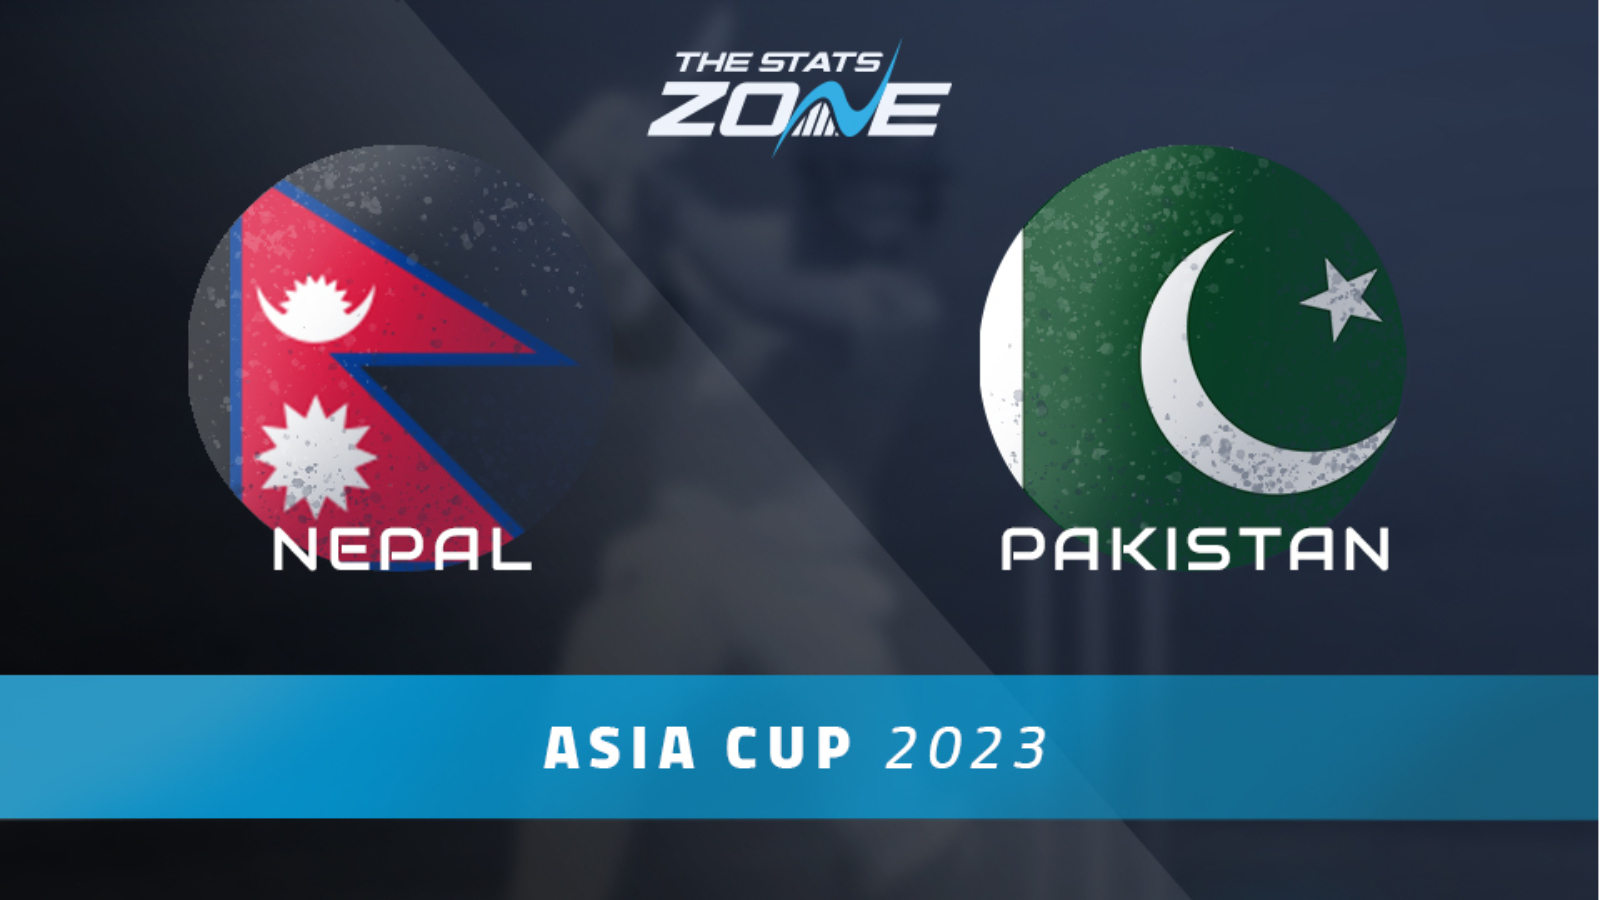 Pakistan vs Nepal Group Stage Preview & Prediction 2023 Asia Cup